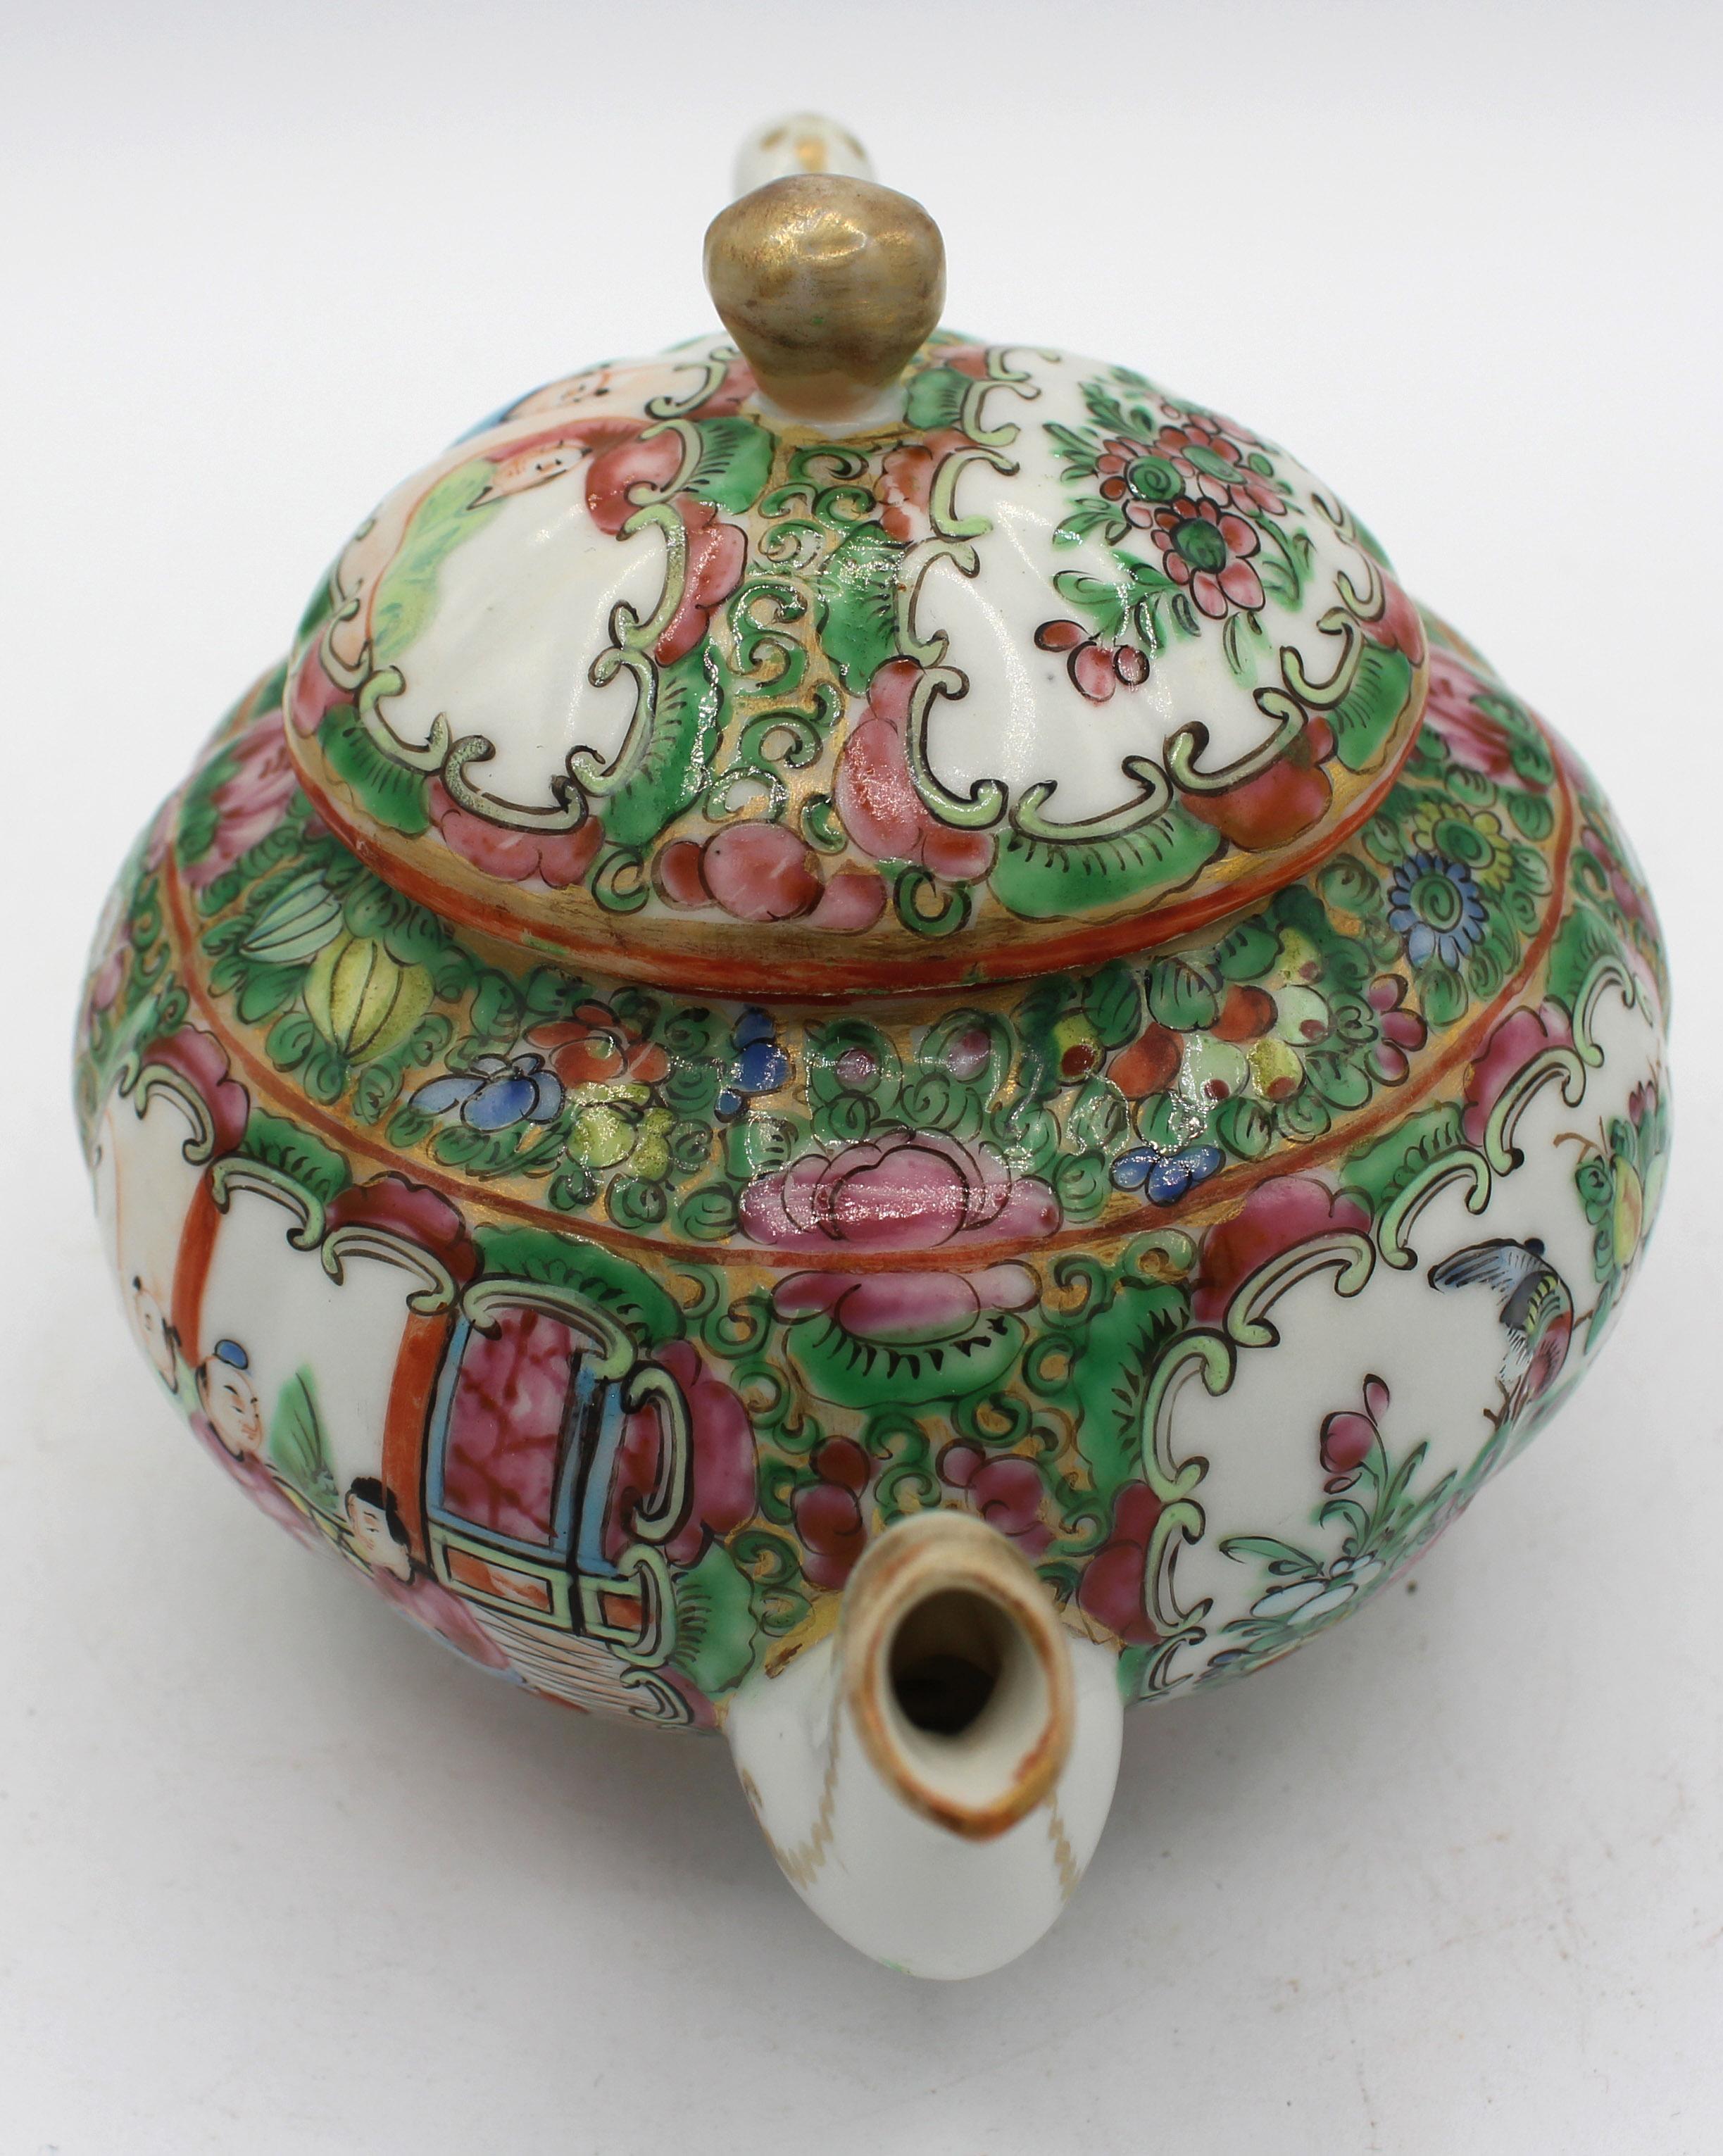 Circa 1880s Chinese Export Rose Medallion Tea Pot & Cover. Late Qing dynasty. Elegantly molded, ribbed body. A form popular in China & the West for hundreds of years. No markings. Fine condition with expected wear to gilding on handle, knob &